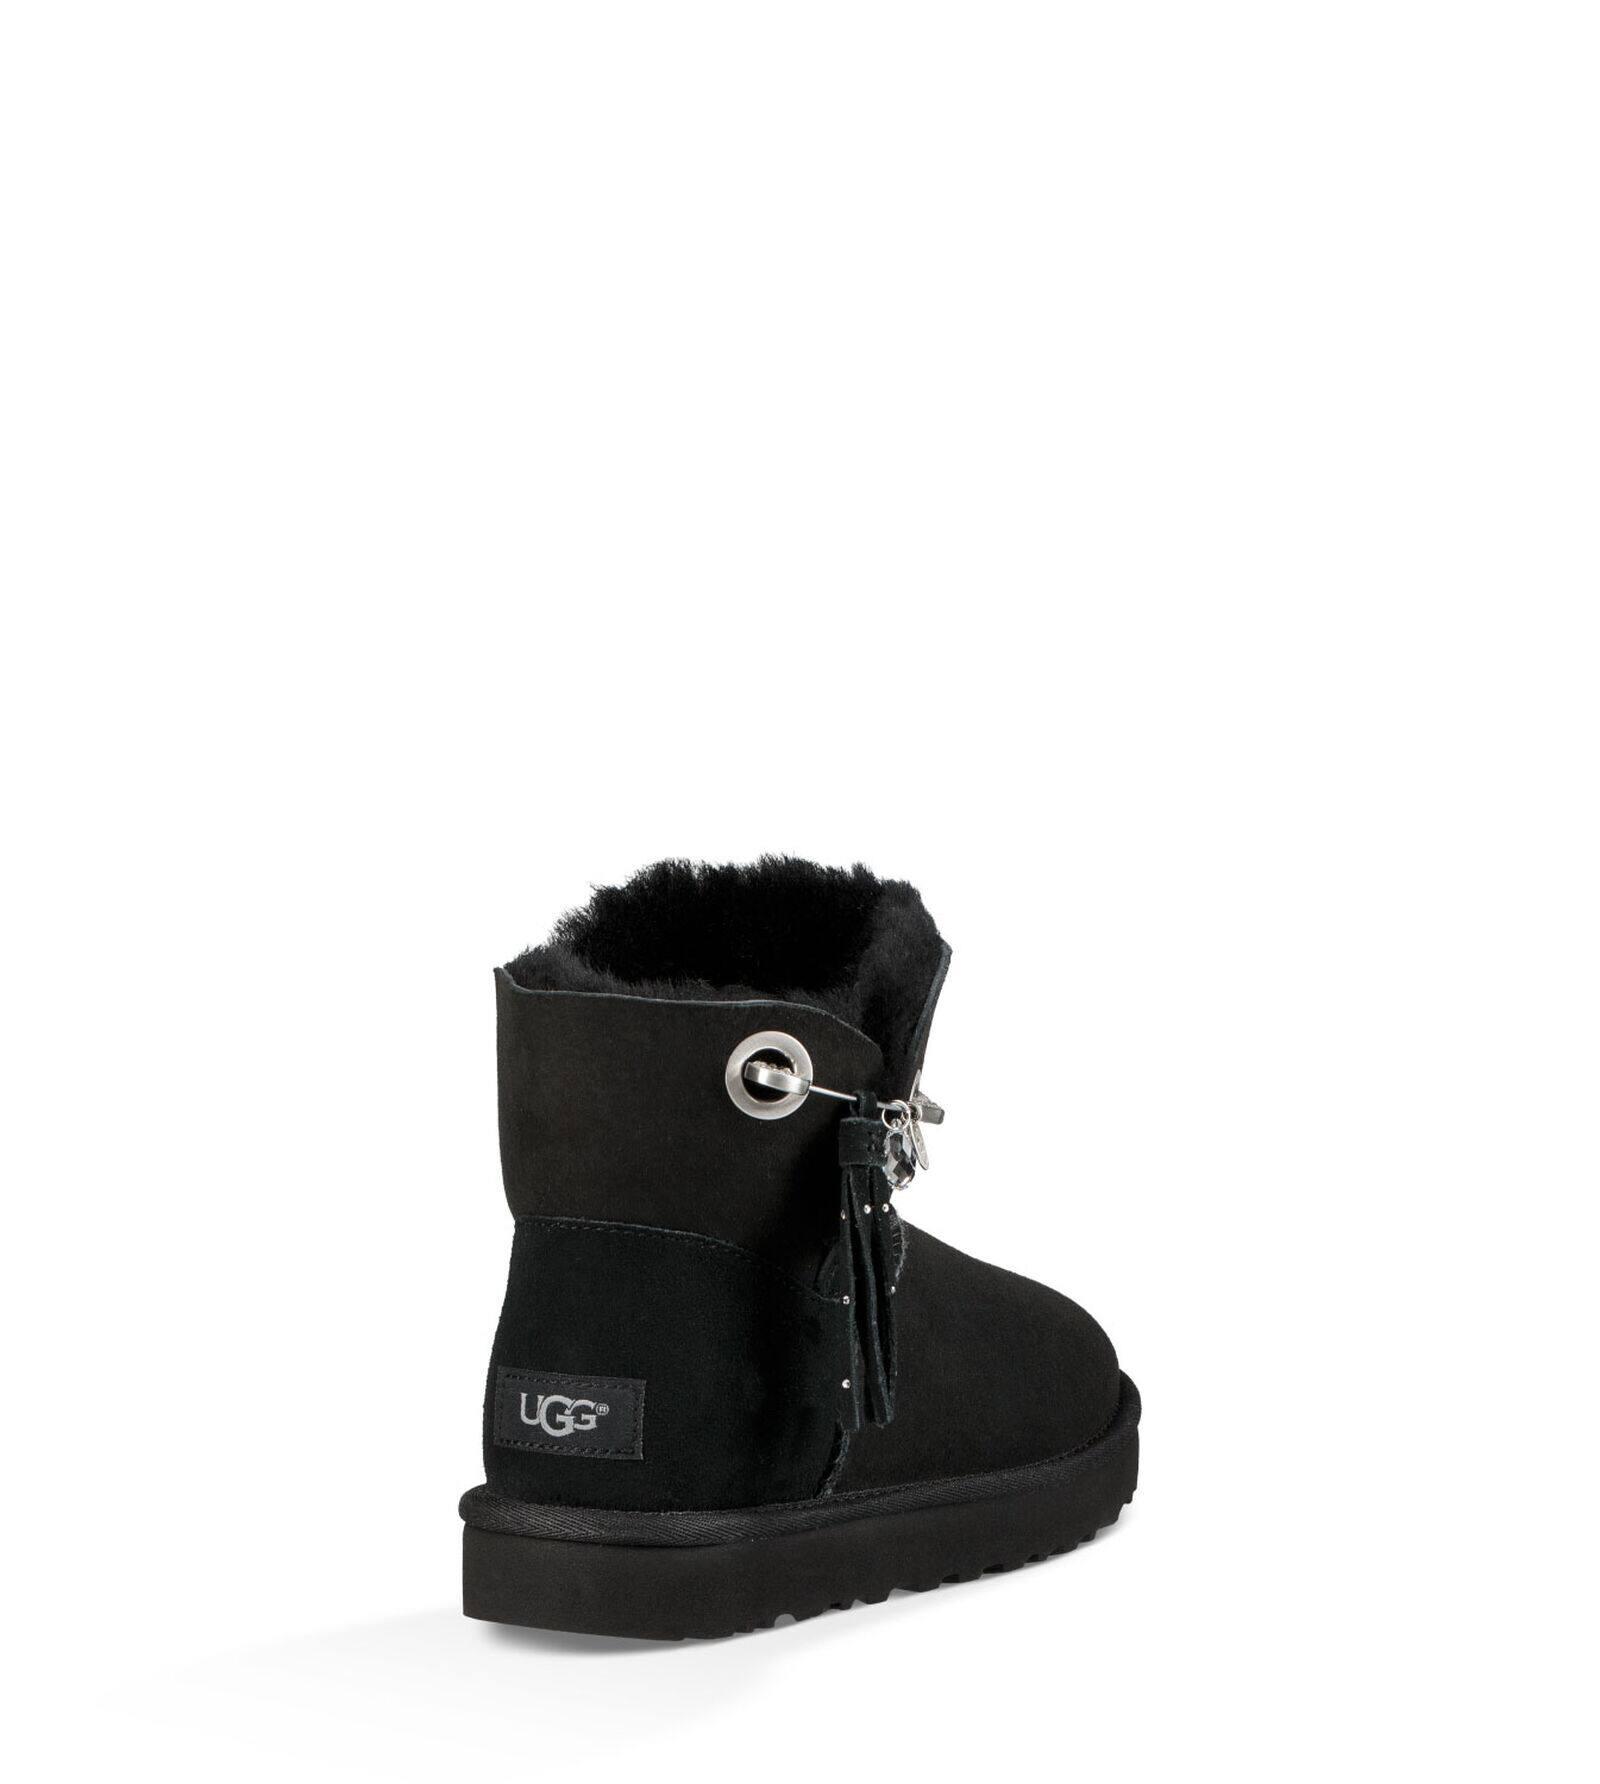 UGG Josey Embellished Suede Boots in Black - Lyst